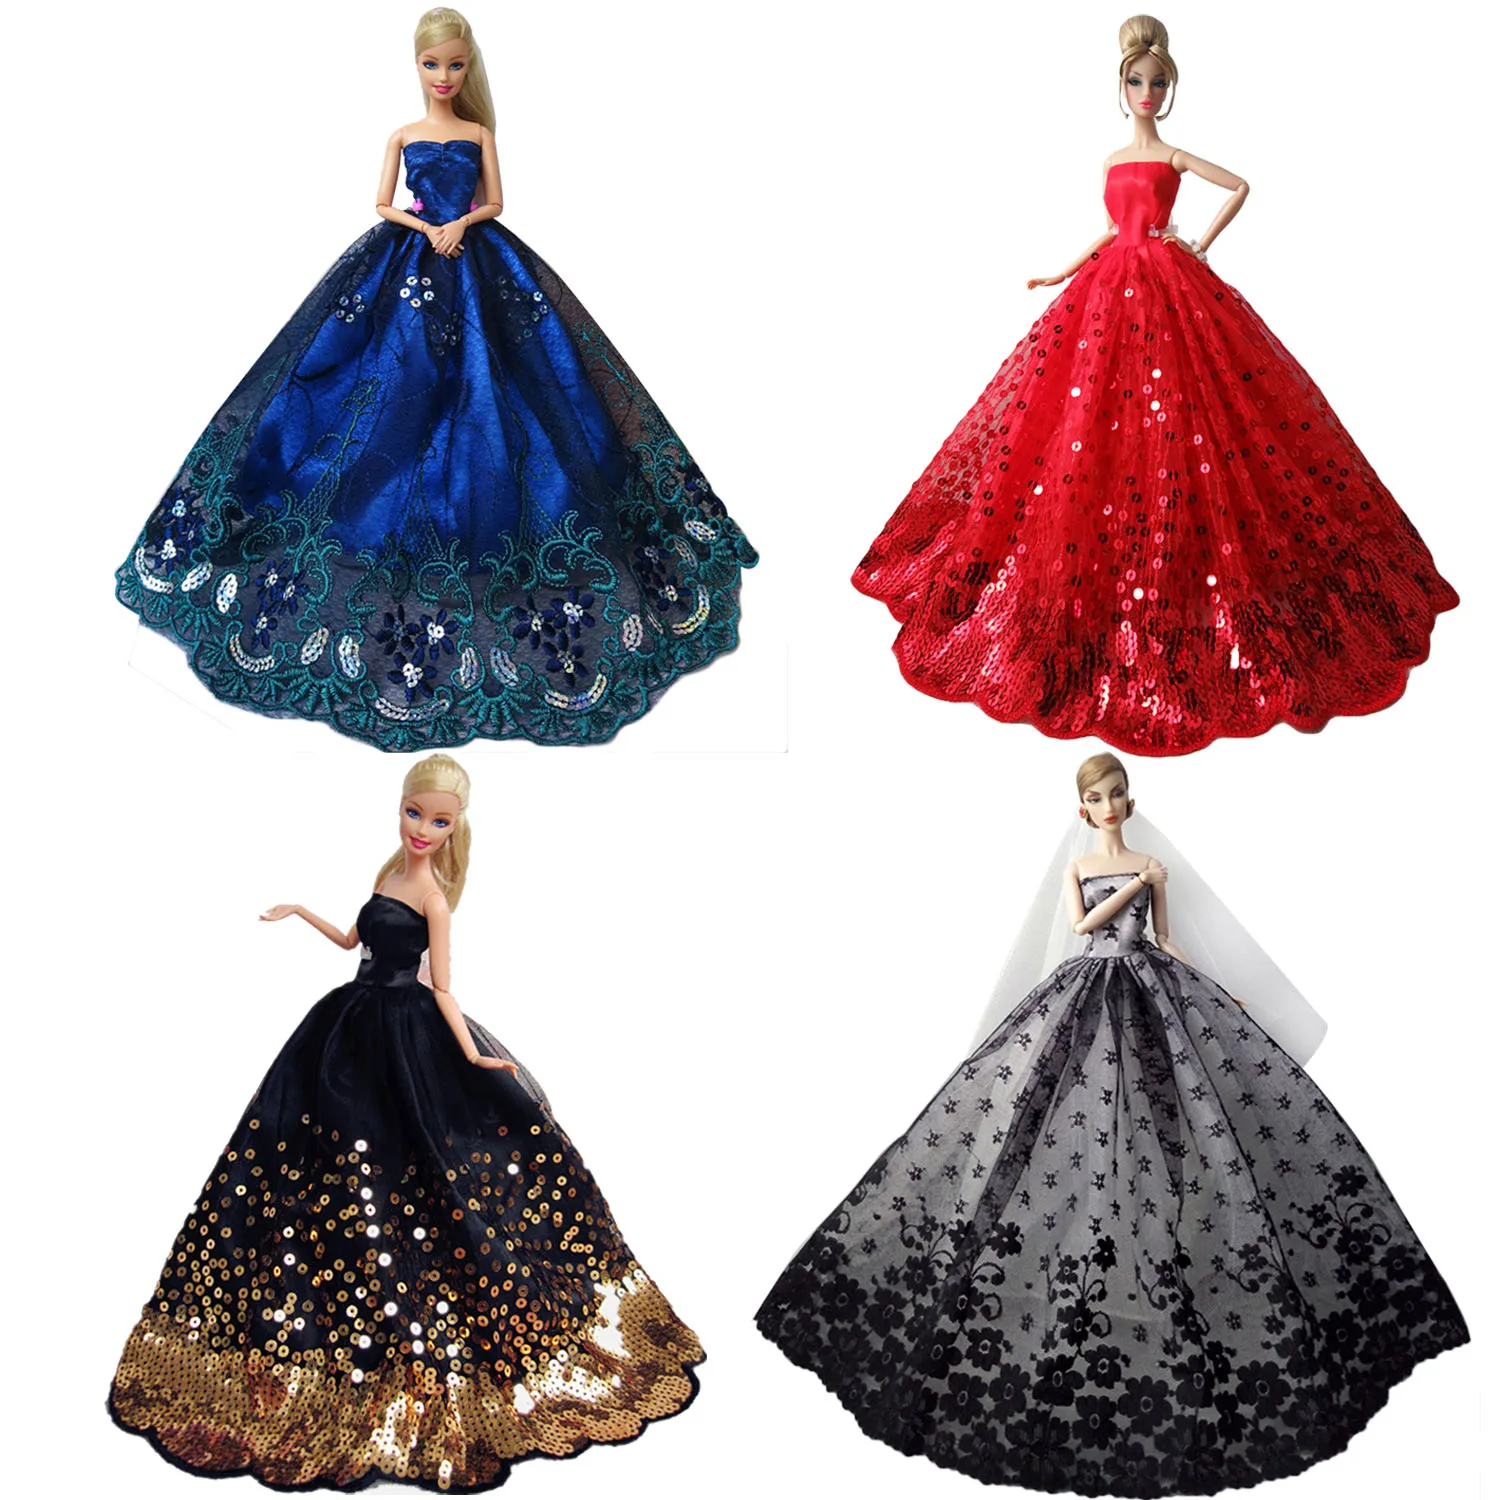 Besegad Mini Girl Doll Long Lace Gauze Dresses Evening Princess Gown Wedding Embroidered Clothes Accessories for Barbie Toy